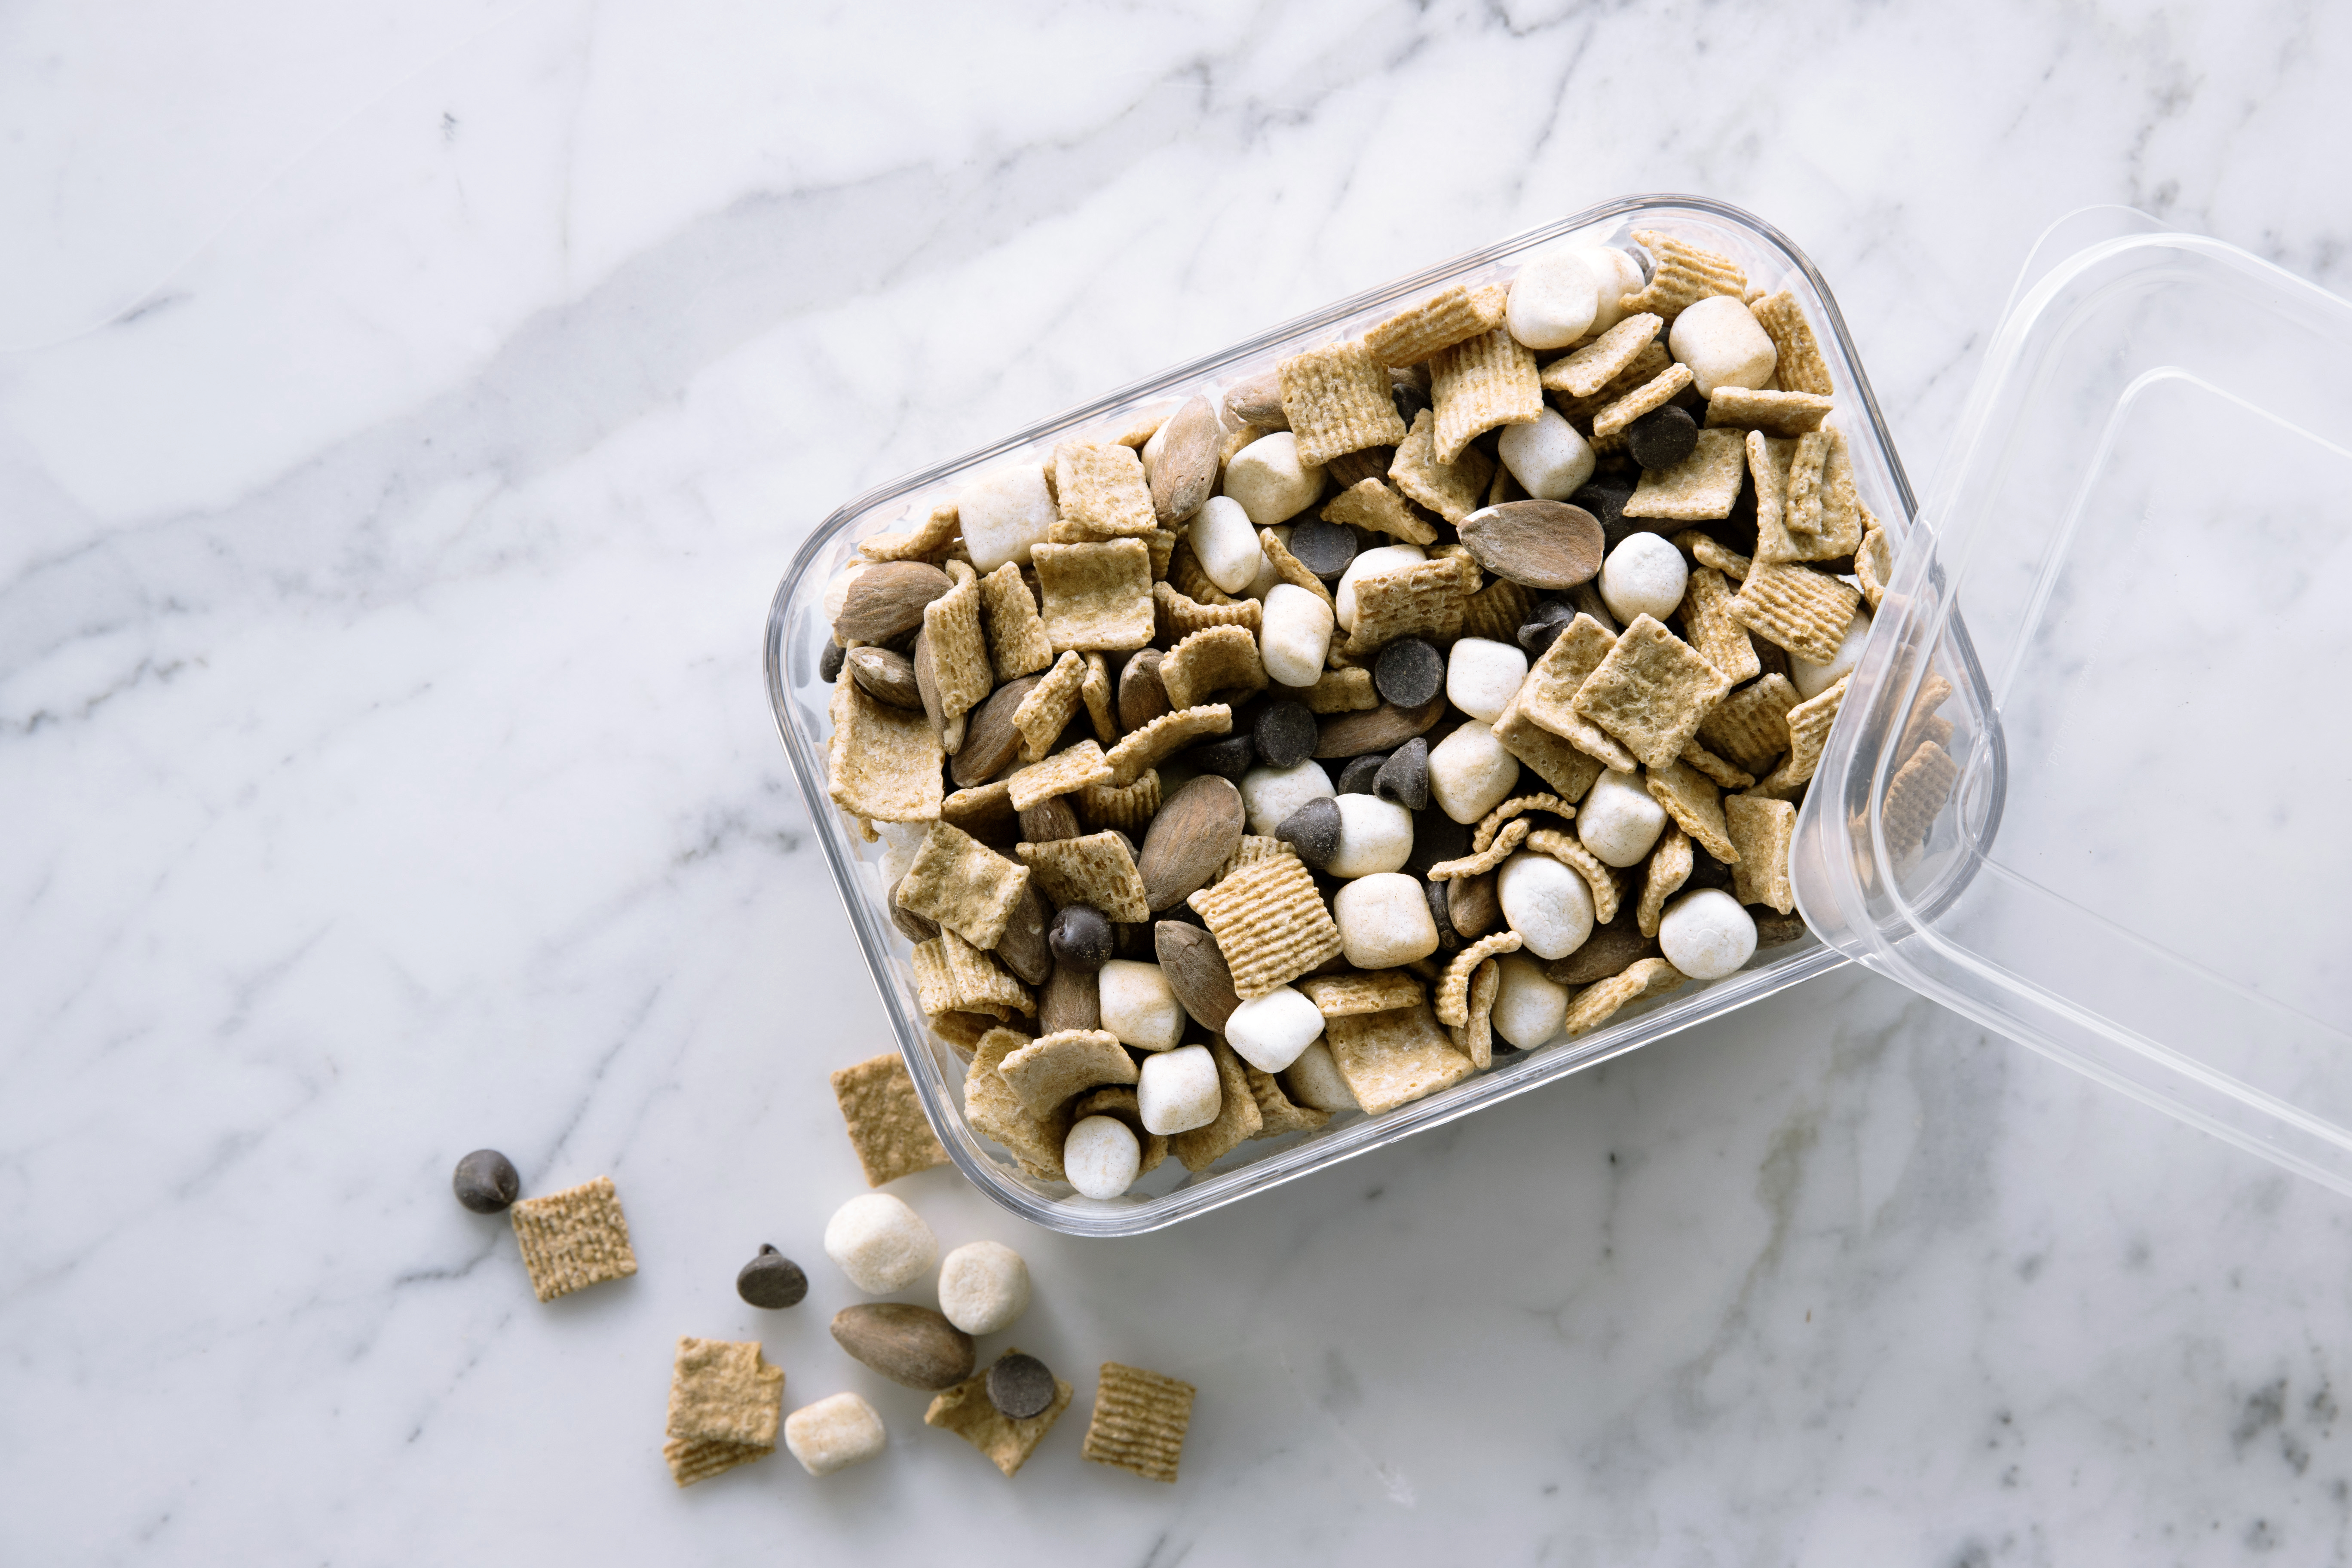 How to Make S'mores Trail Mix